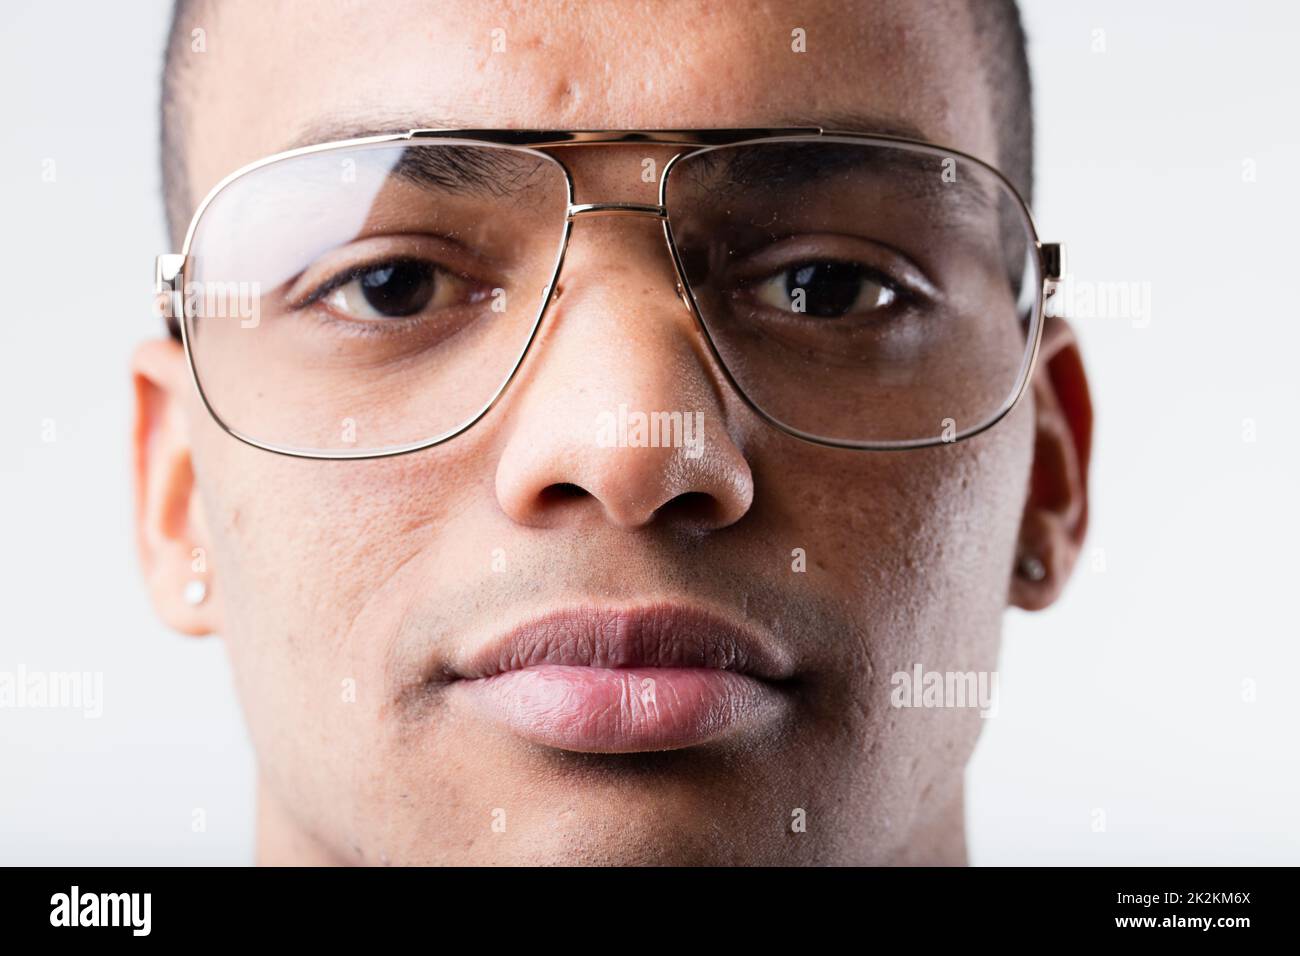 black man with big ugly glasses Stock Photo